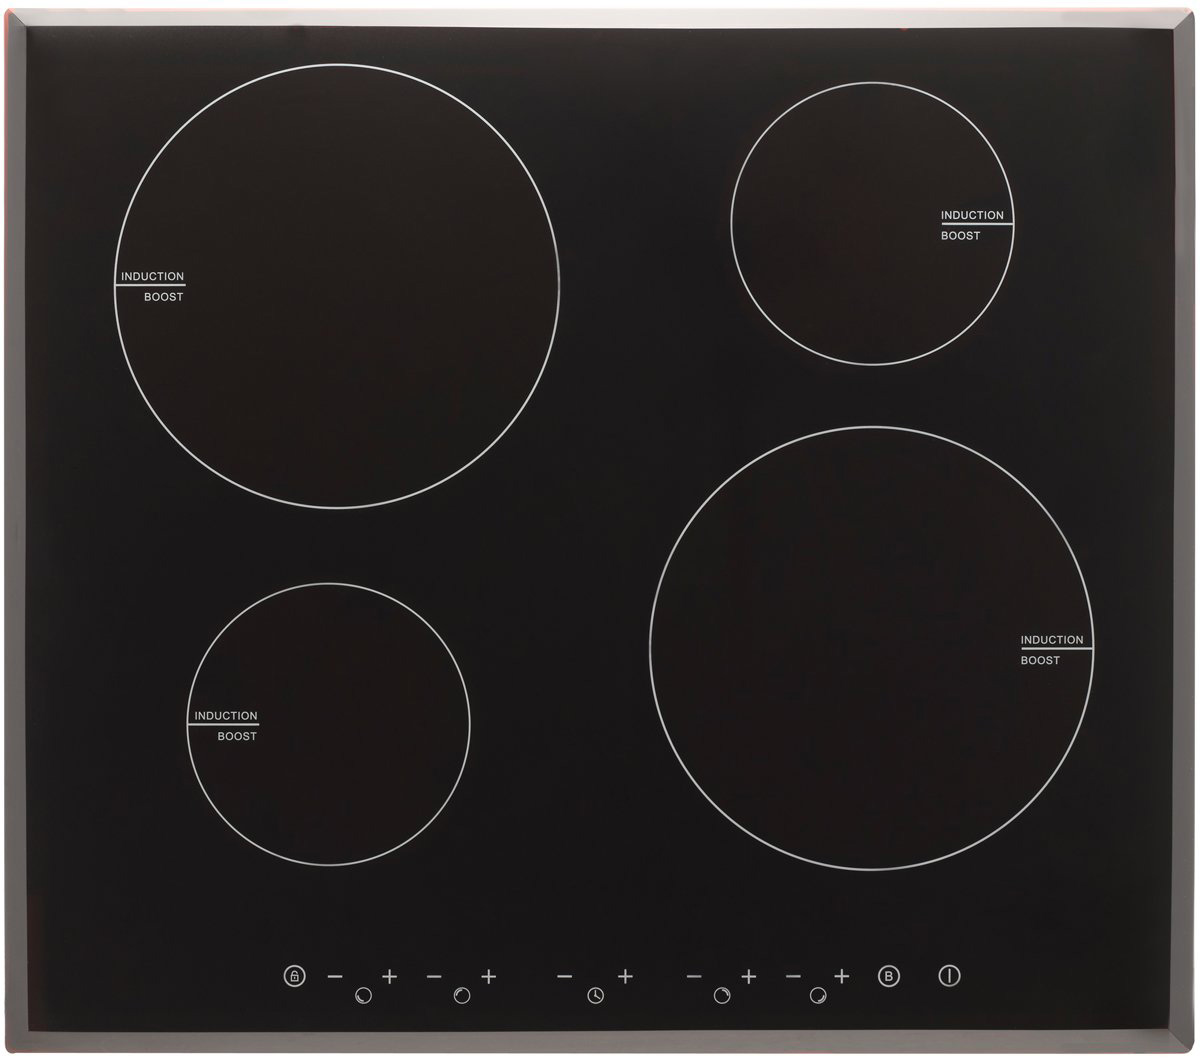 whats an induction stove top